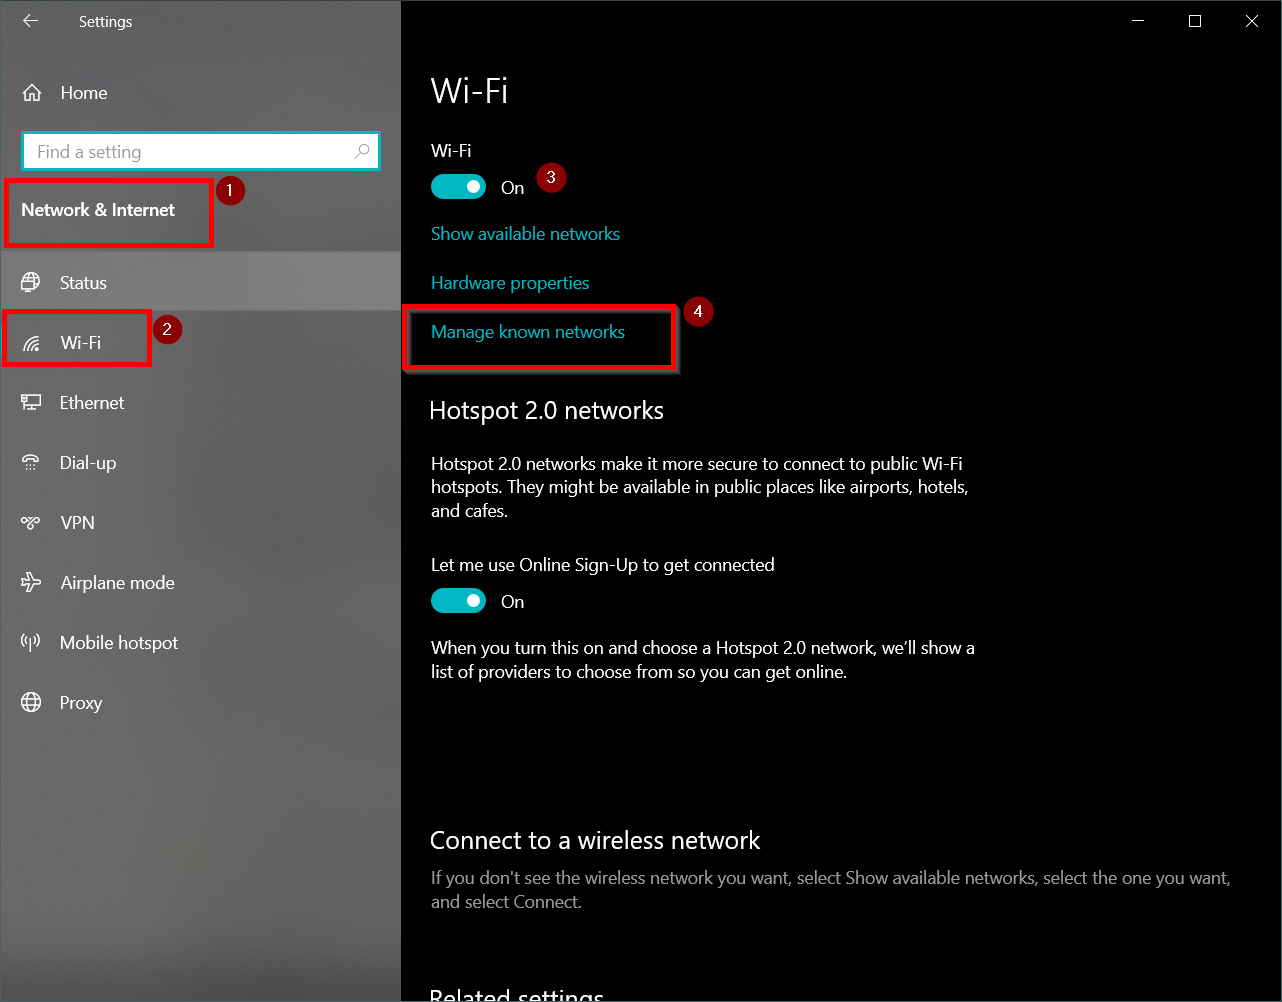 The Golden Throw Fix for attaching Windows 10 WiFi immediately